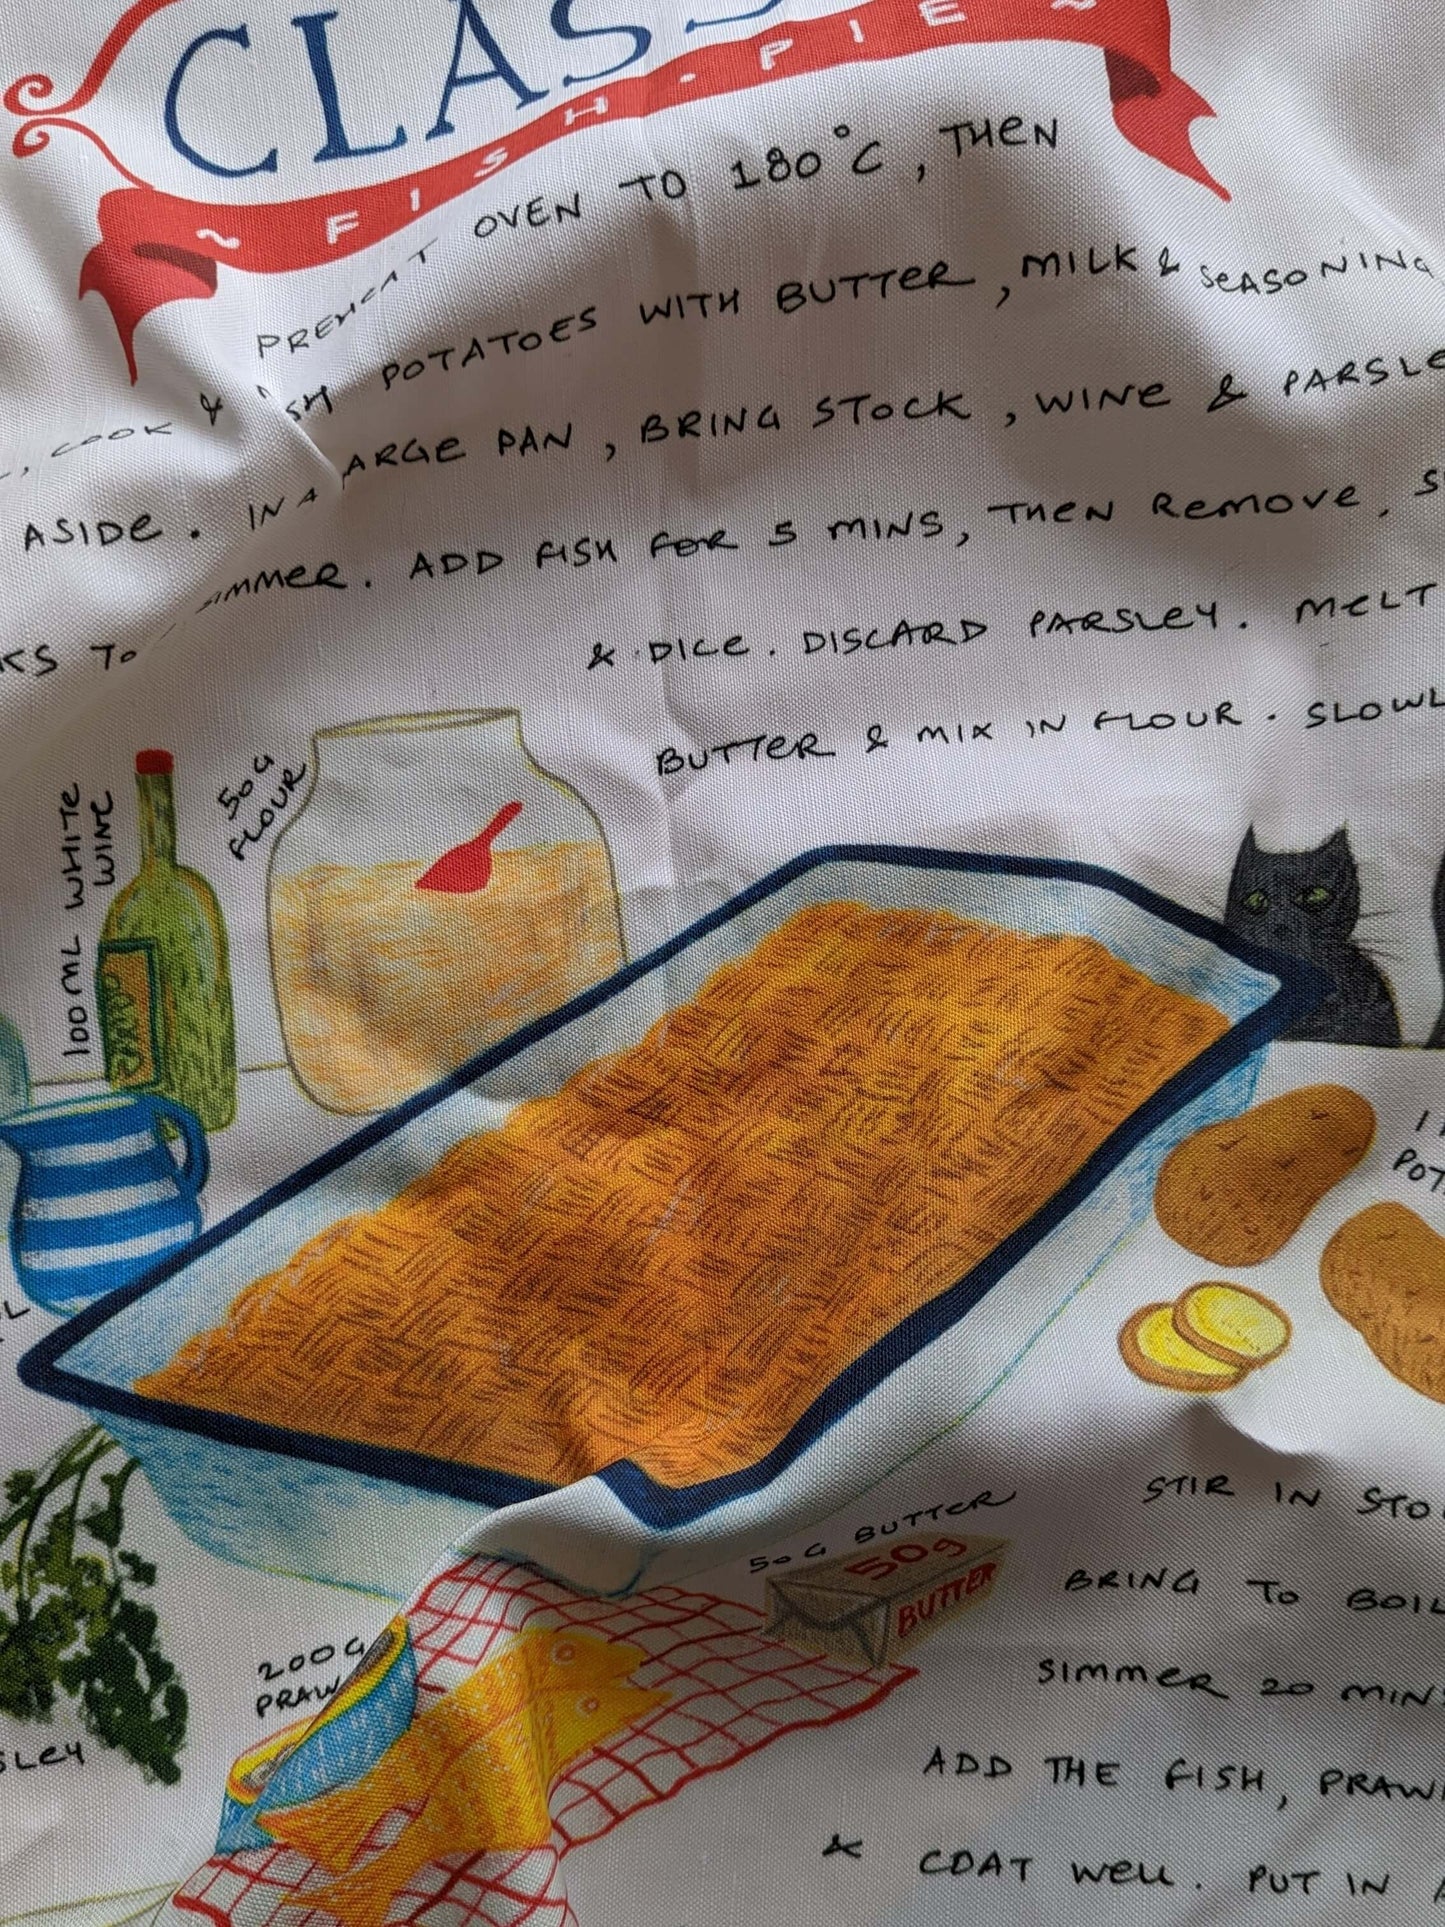 Classic Fish Pie recipe – (end of line) tea towel / wall hanging